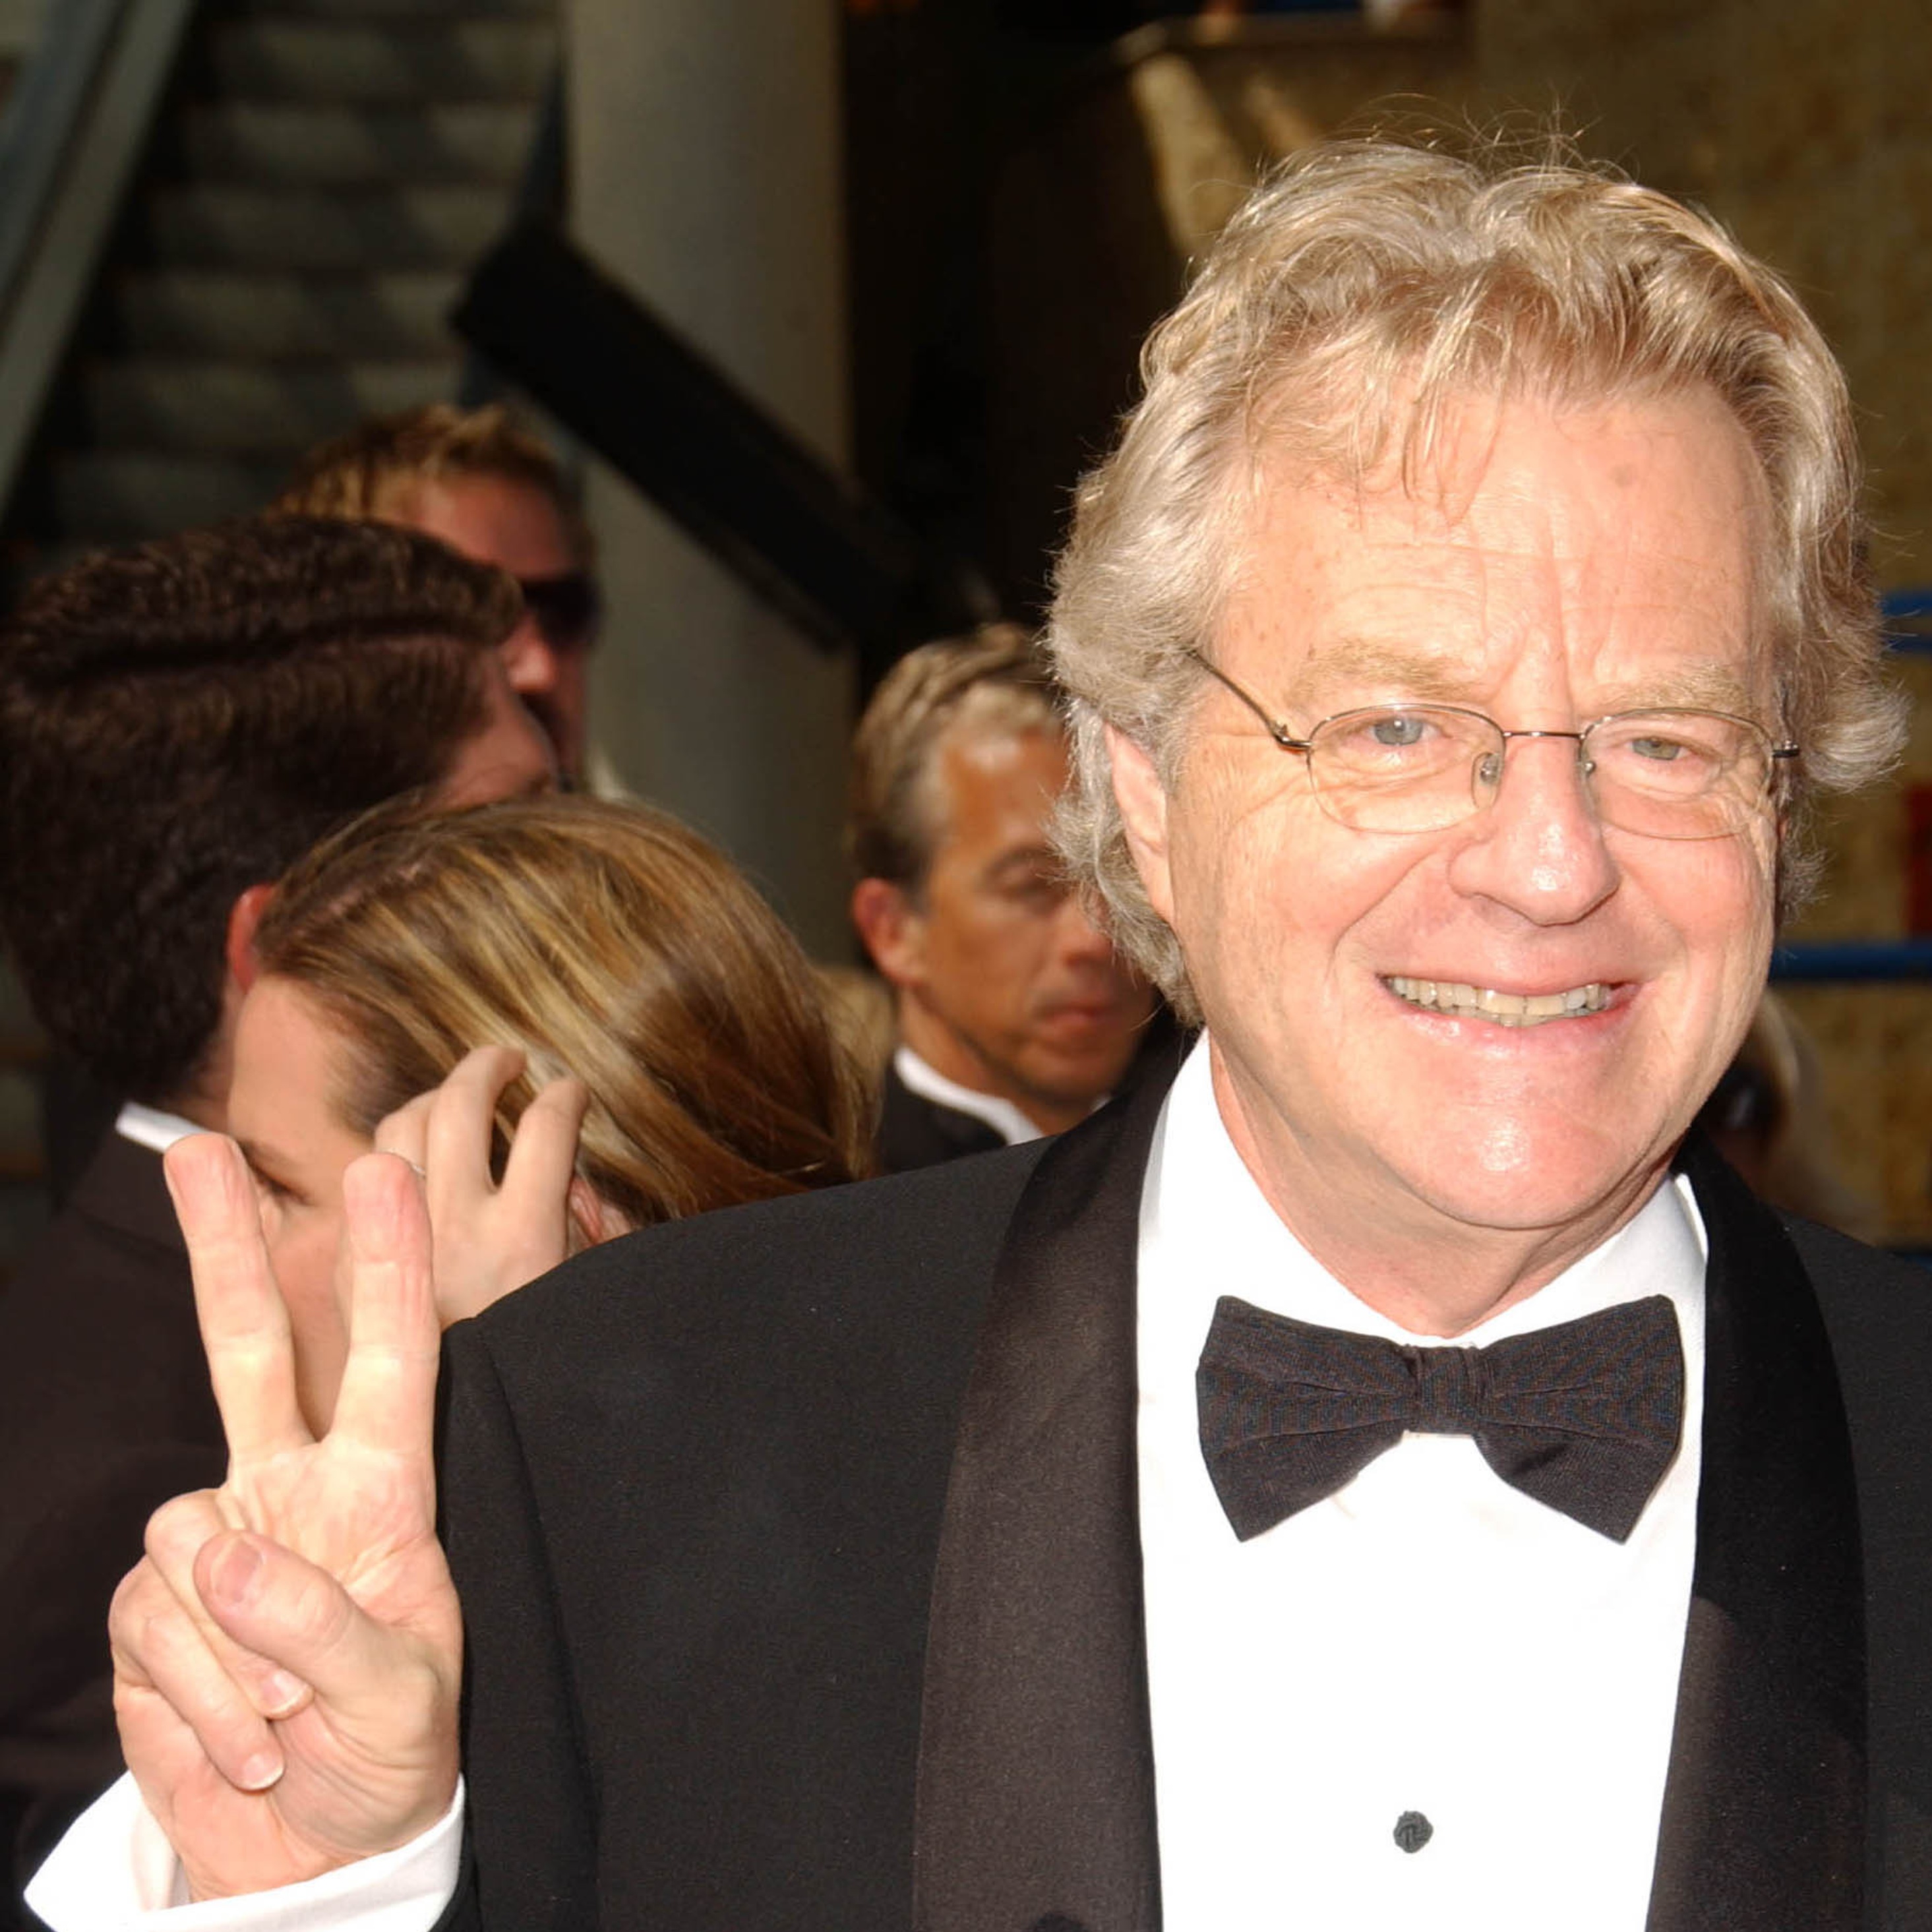 Popular Legendary Television Host Jerry Springer has died at 79